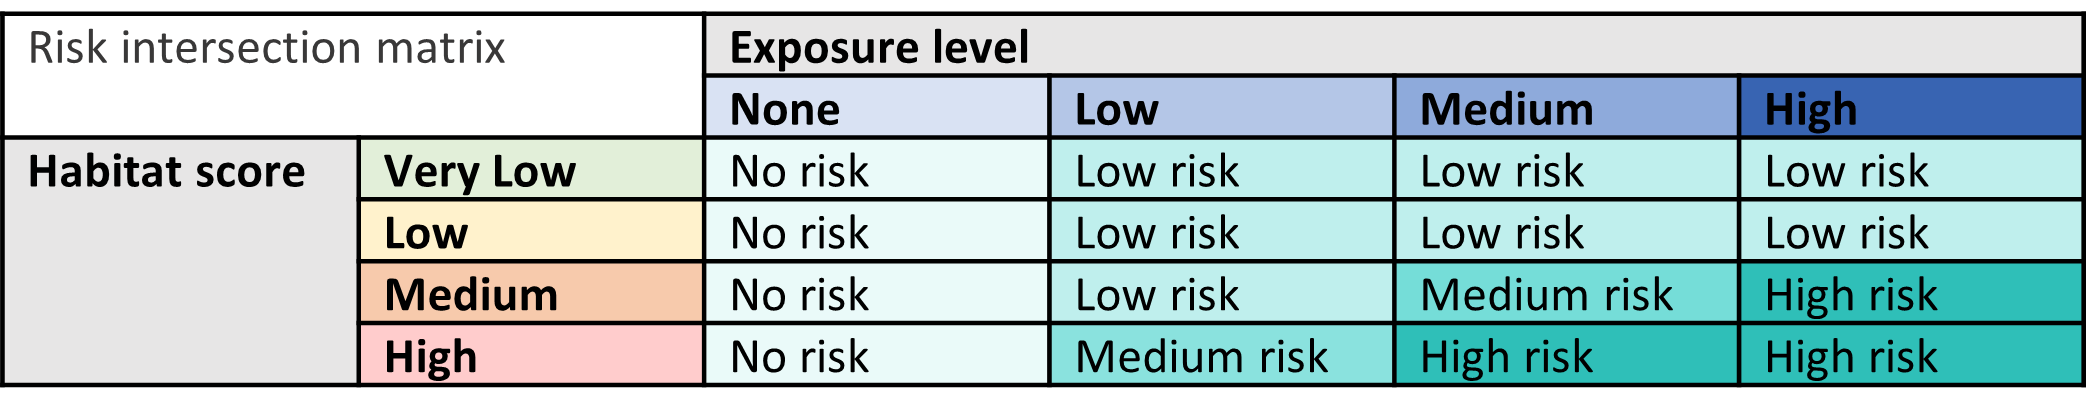 risk intersection matrix used to calculate the feast score as established using the exposure level and habitat score